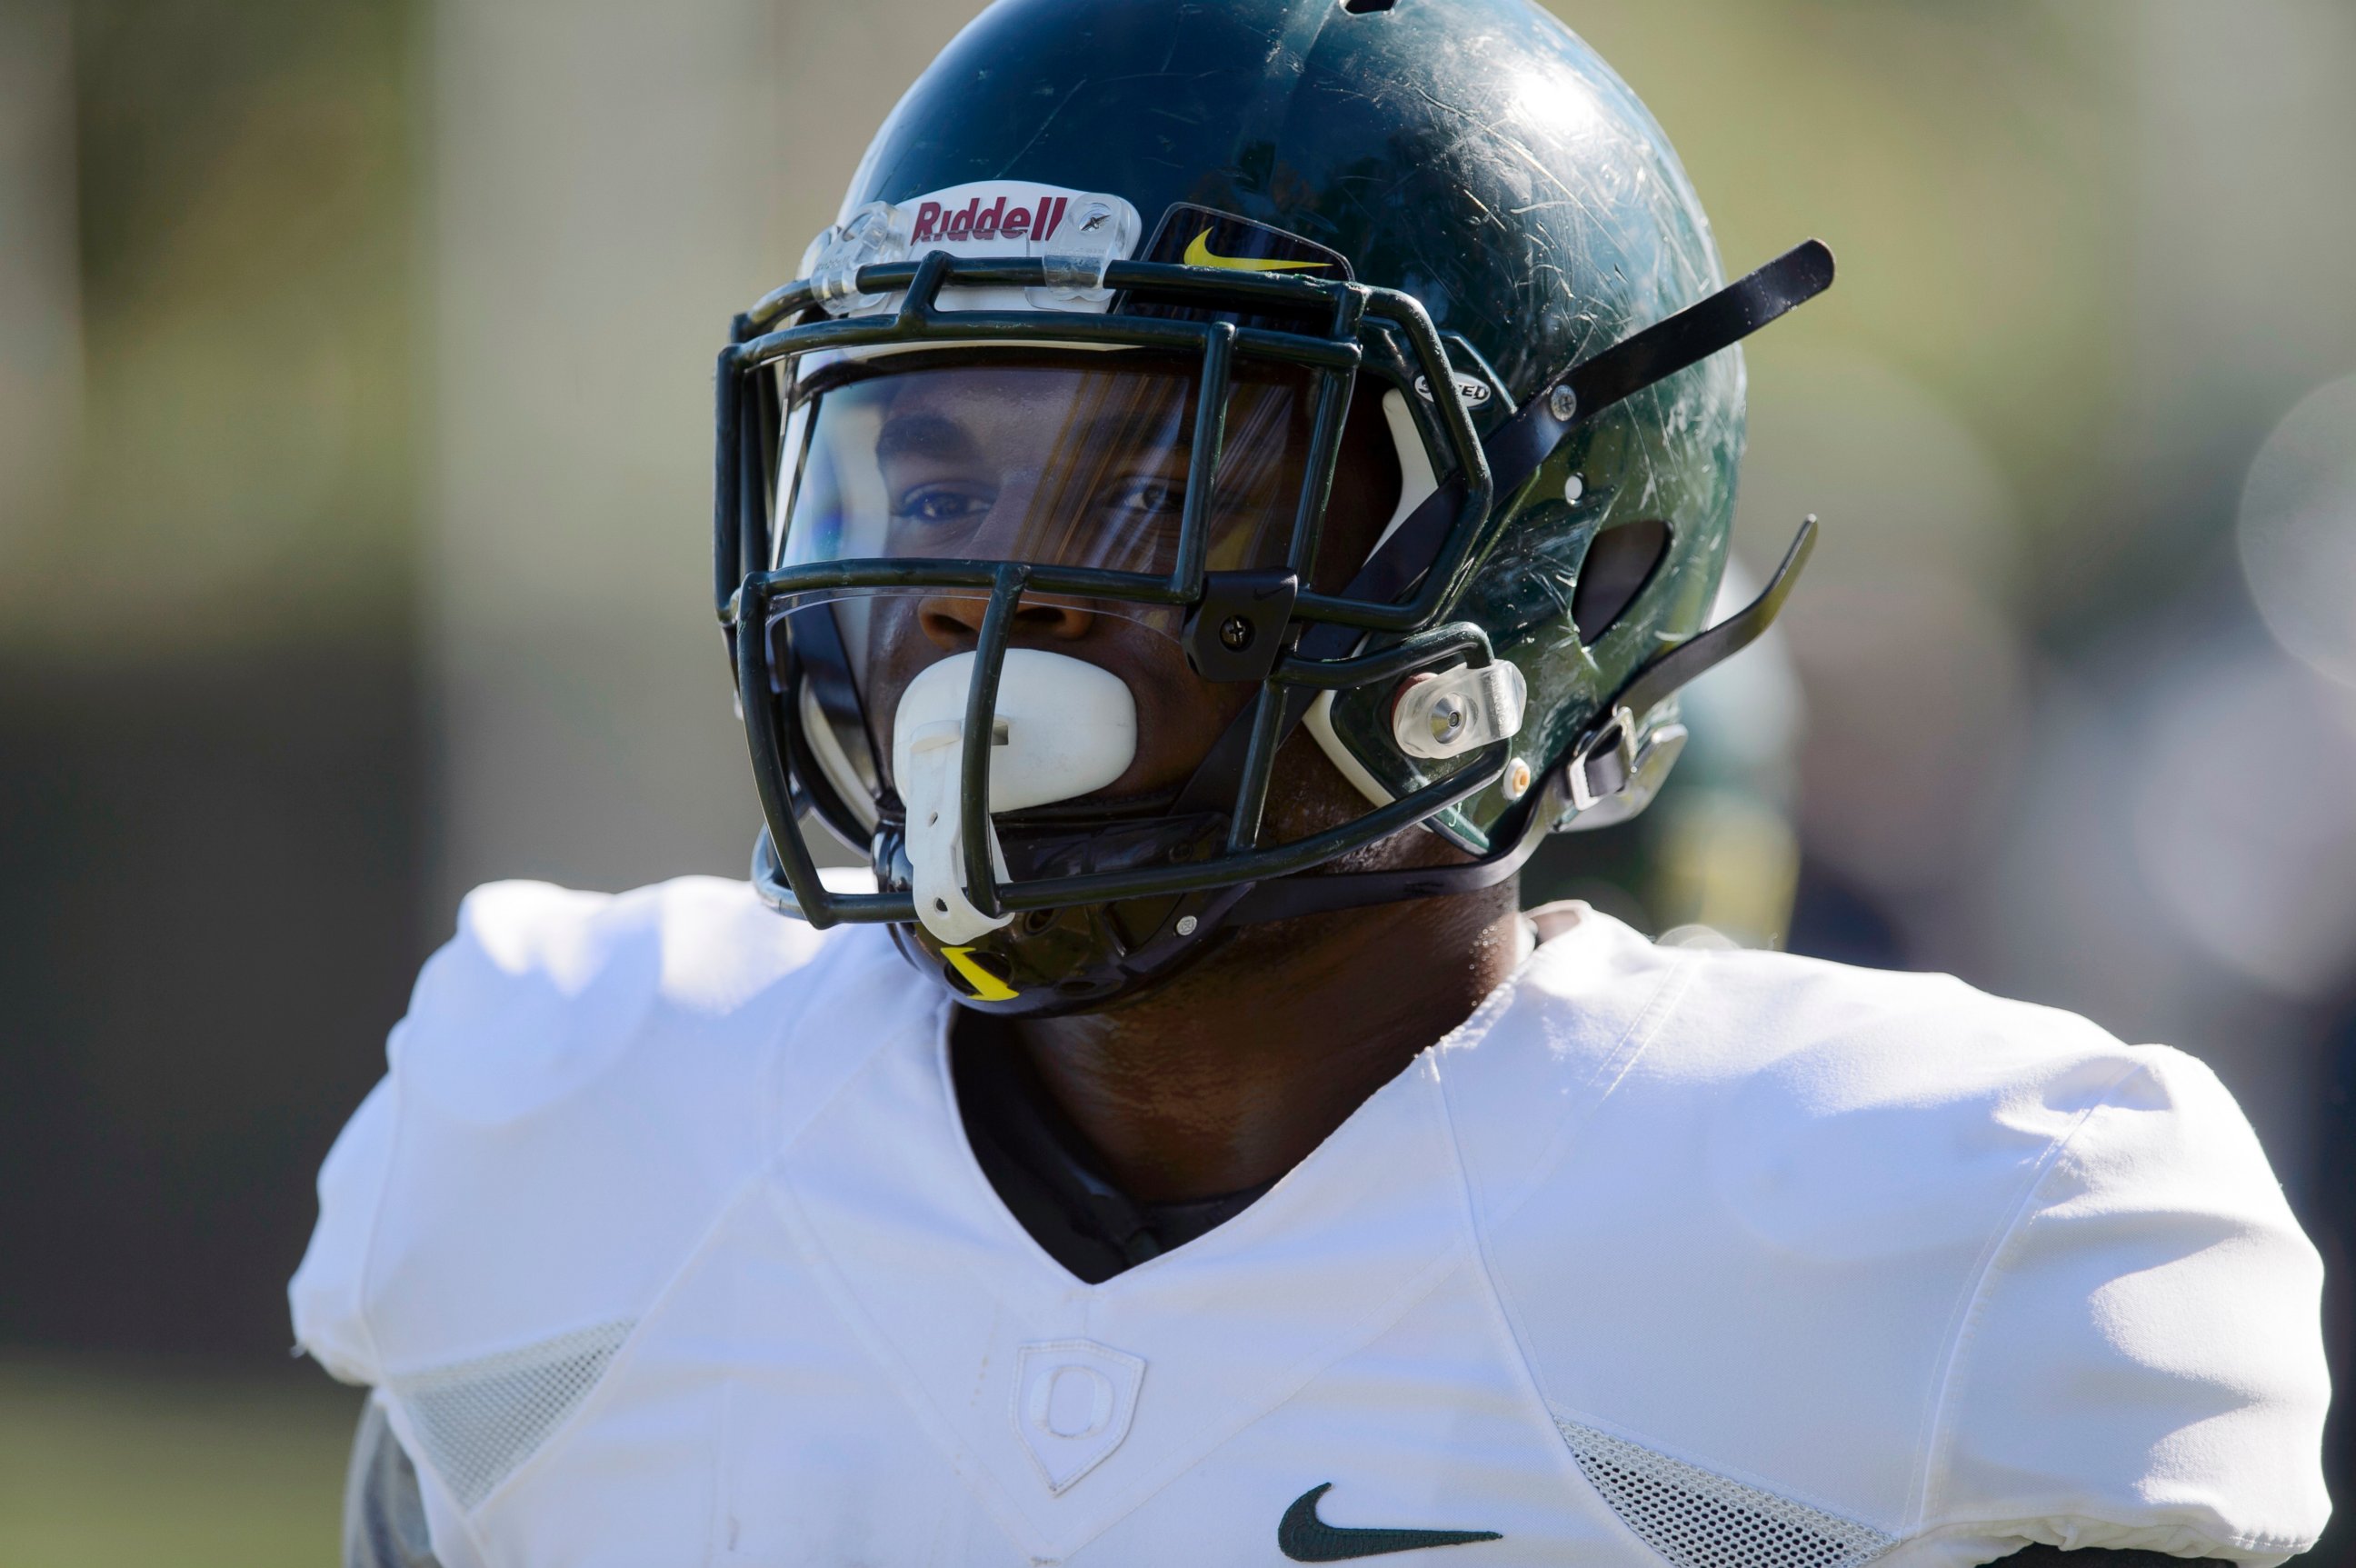 Oregon running back Royce Freeman looks on during NCAA college football practice in Carson, Calif., Sunday, Dec. 28, 2014. Oregon is scheduled to play Florida State in the Rose Bowl NCAA college football playoff semifinal on New Year's Day.